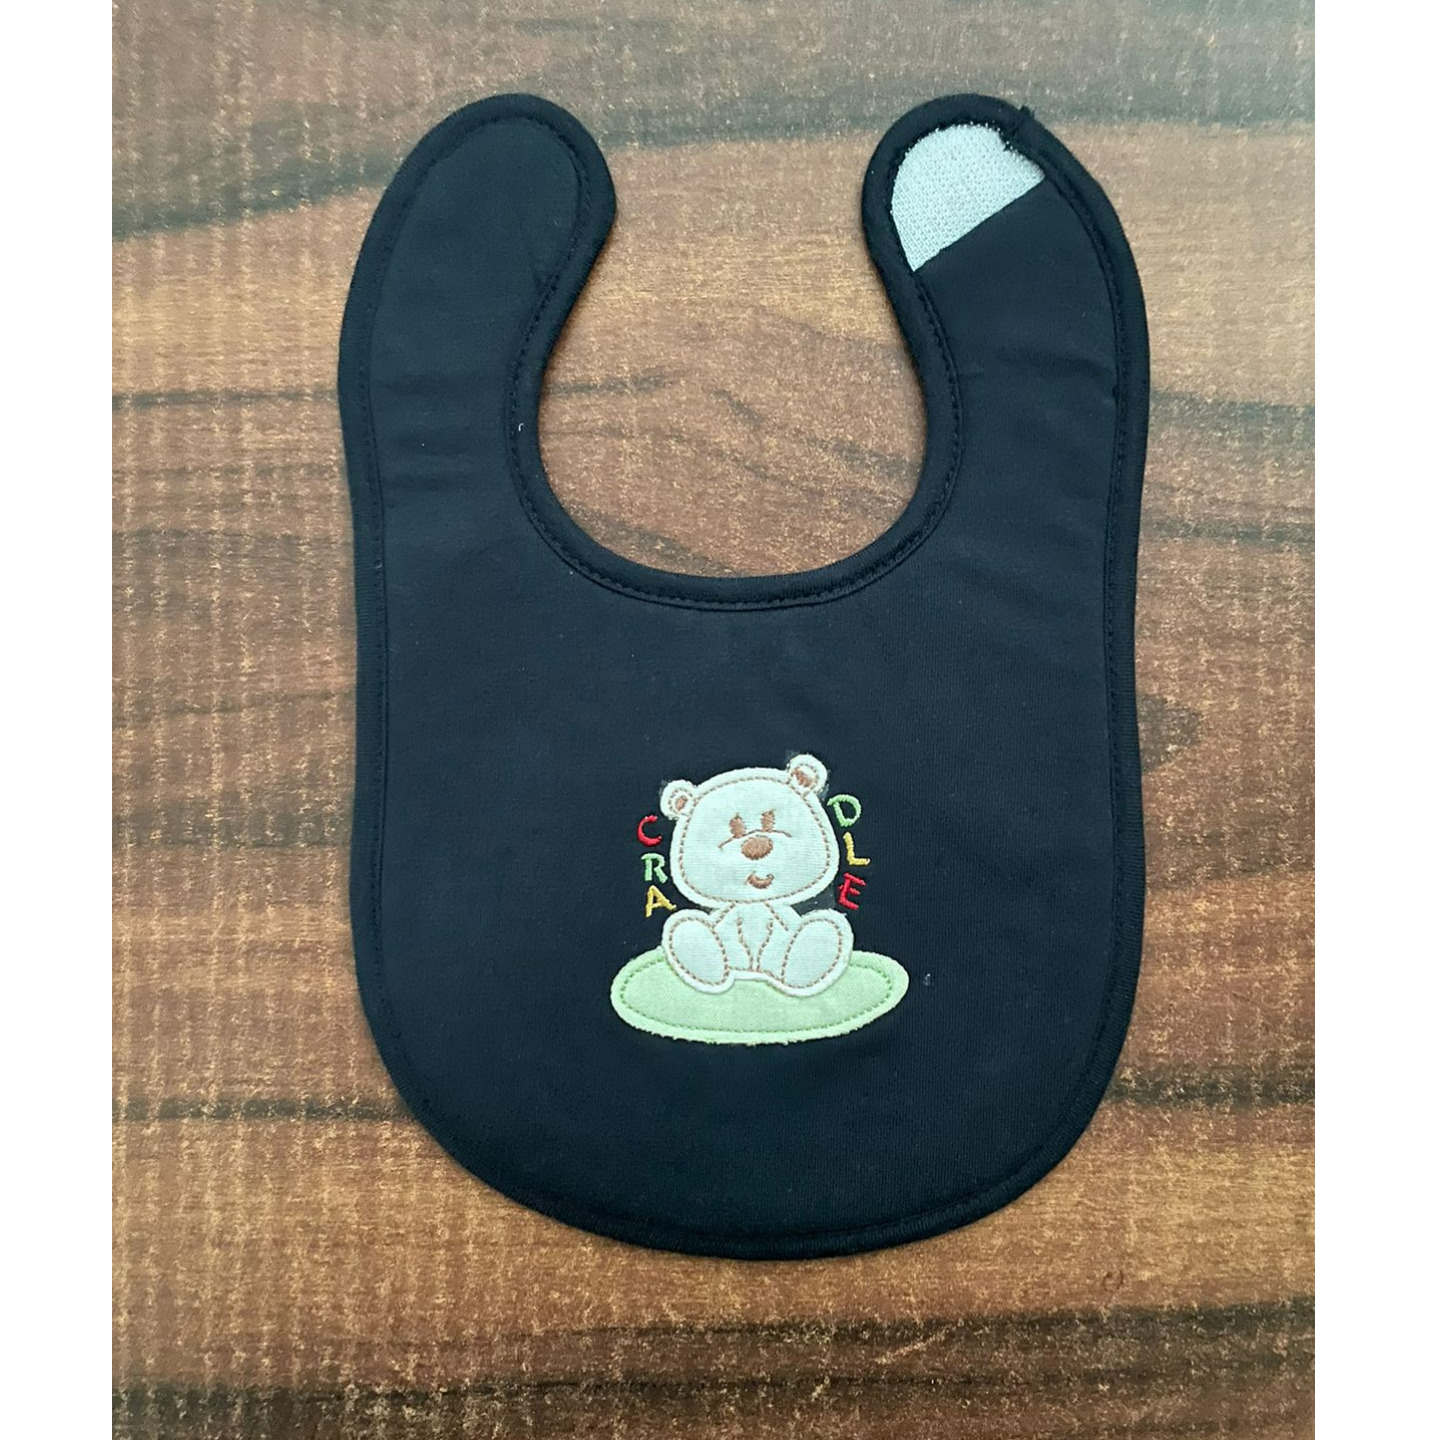 Cradle Togs Newborn Baby Bibs Rs 160 Only  Blue